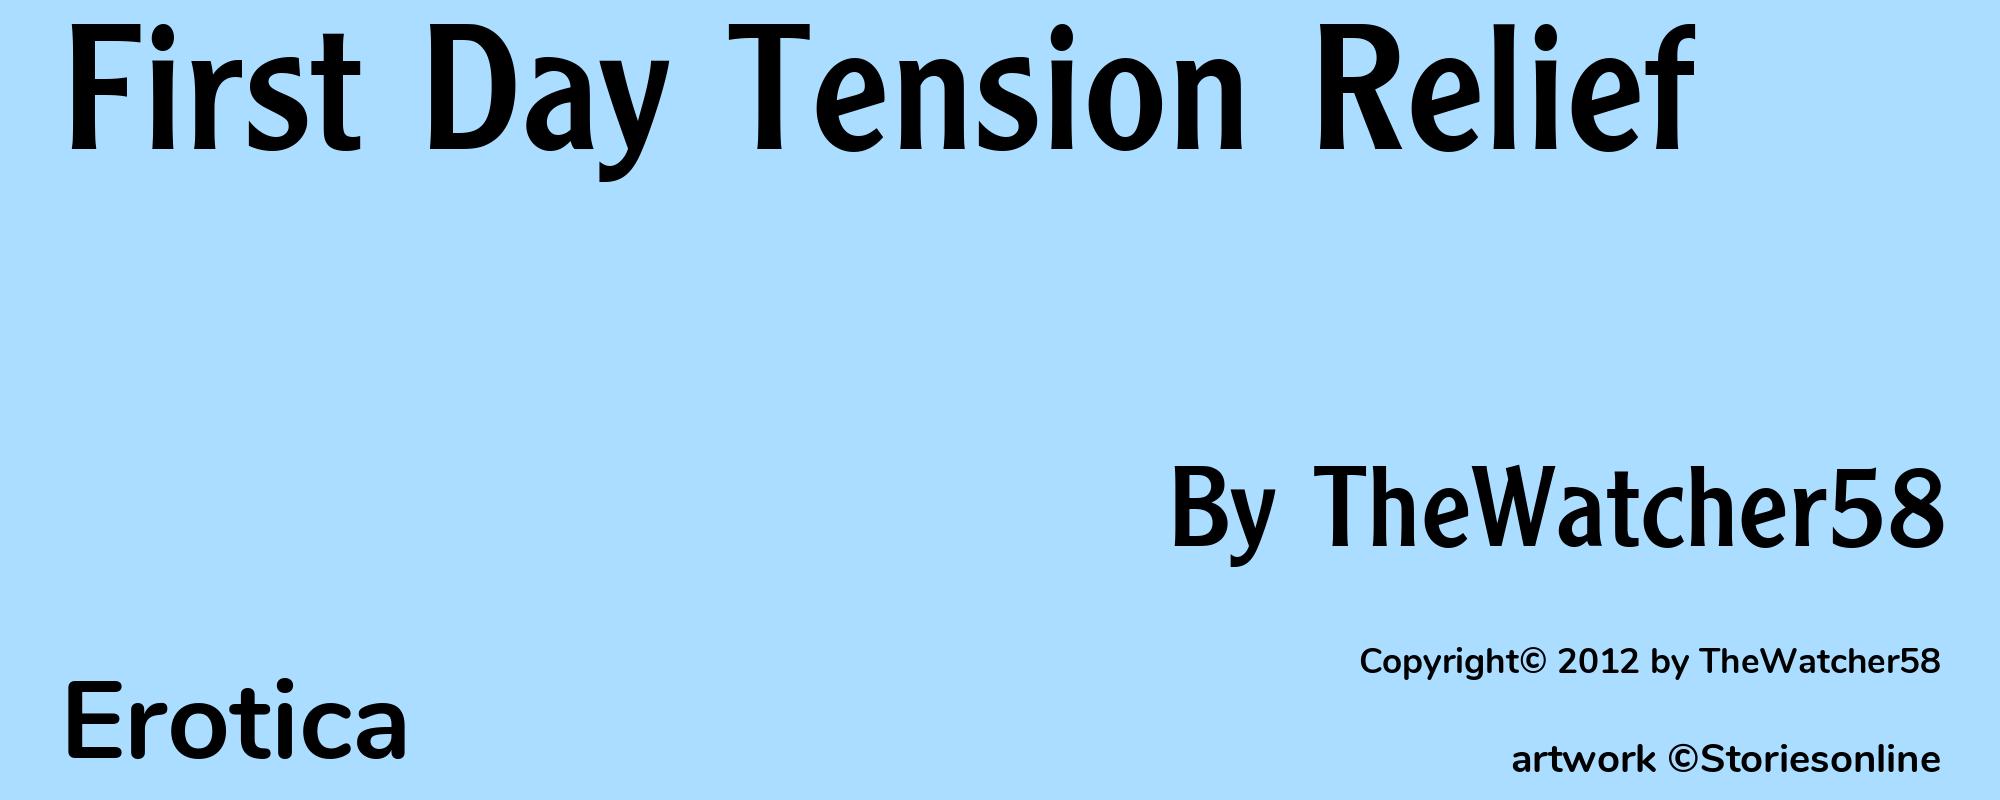 First Day Tension Relief - Cover